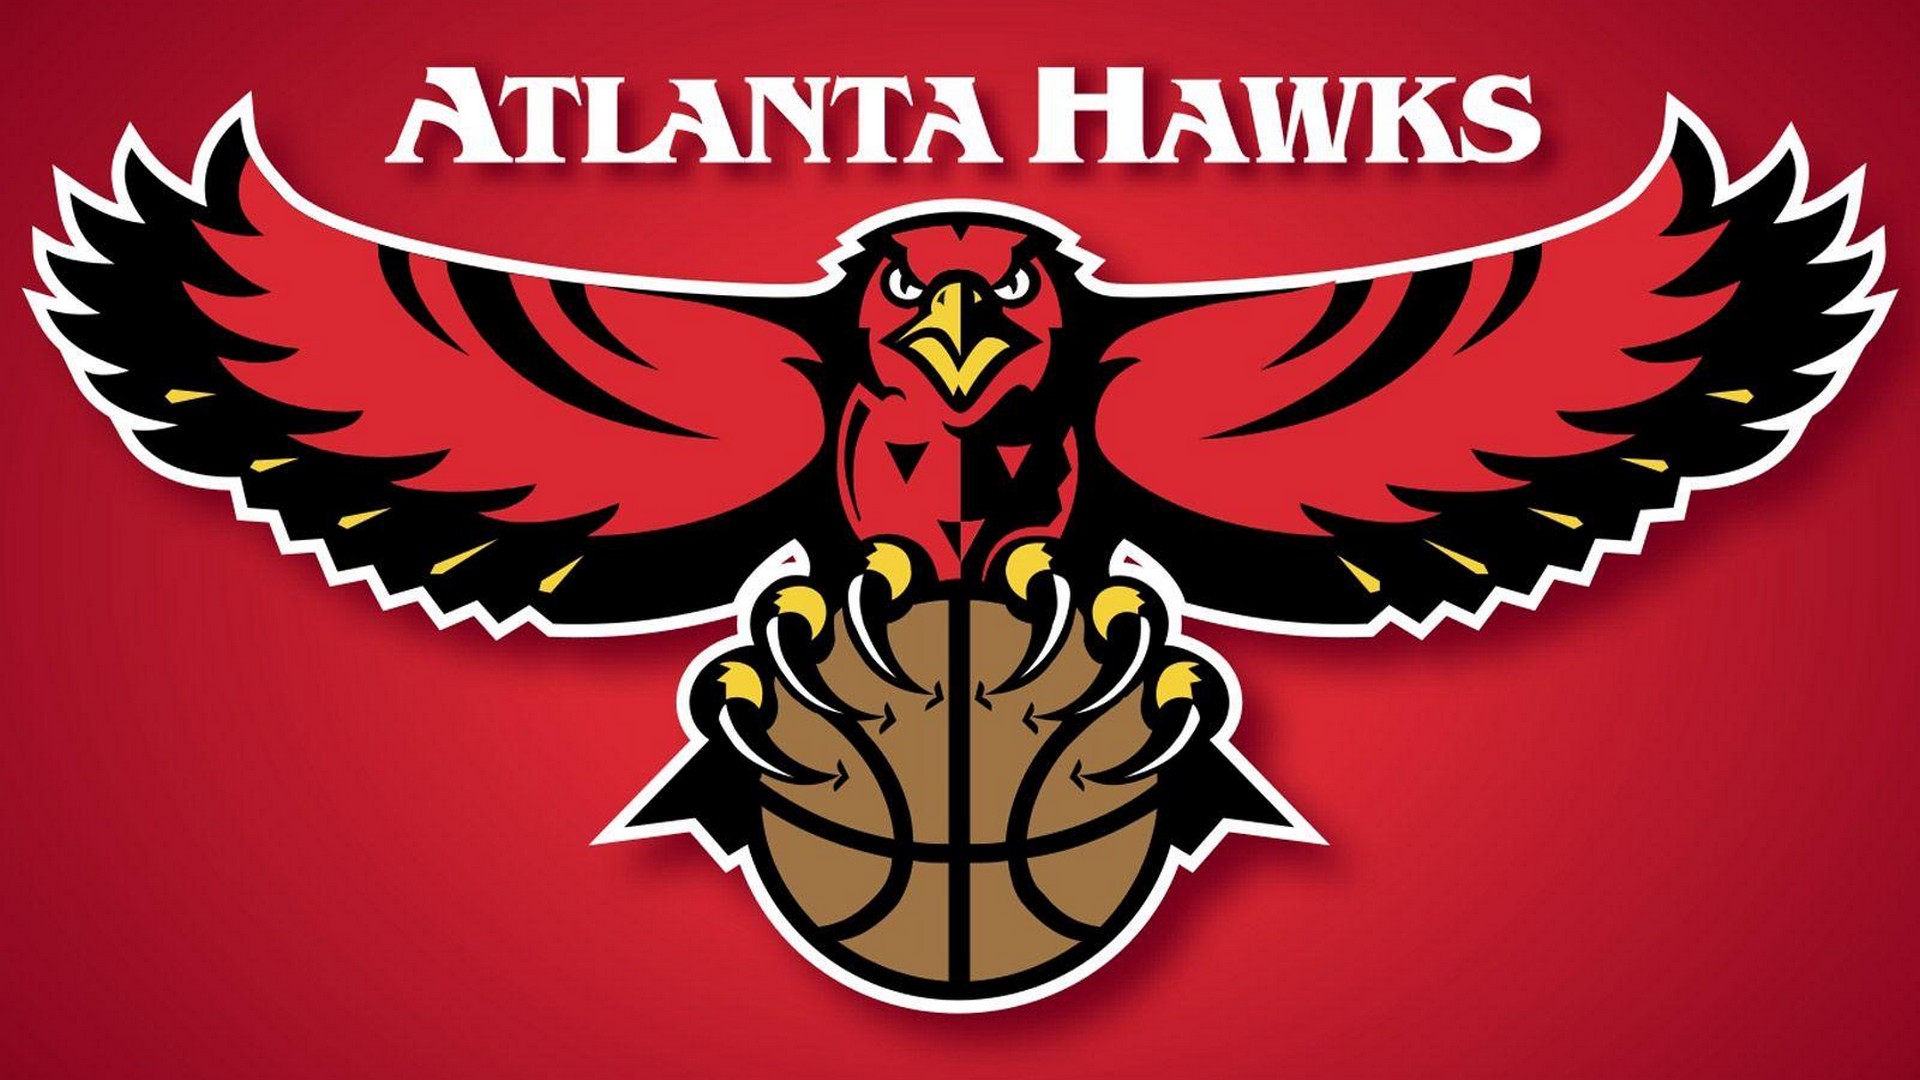 Atlanta Hawks Desktop Wallpaper with image dimensions 1920x1080 pixel. You can make this wallpaper for your Desktop Computer Backgrounds, Windows or Mac Screensavers, iPhone Lock screen, Tablet or Android and another Mobile Phone device